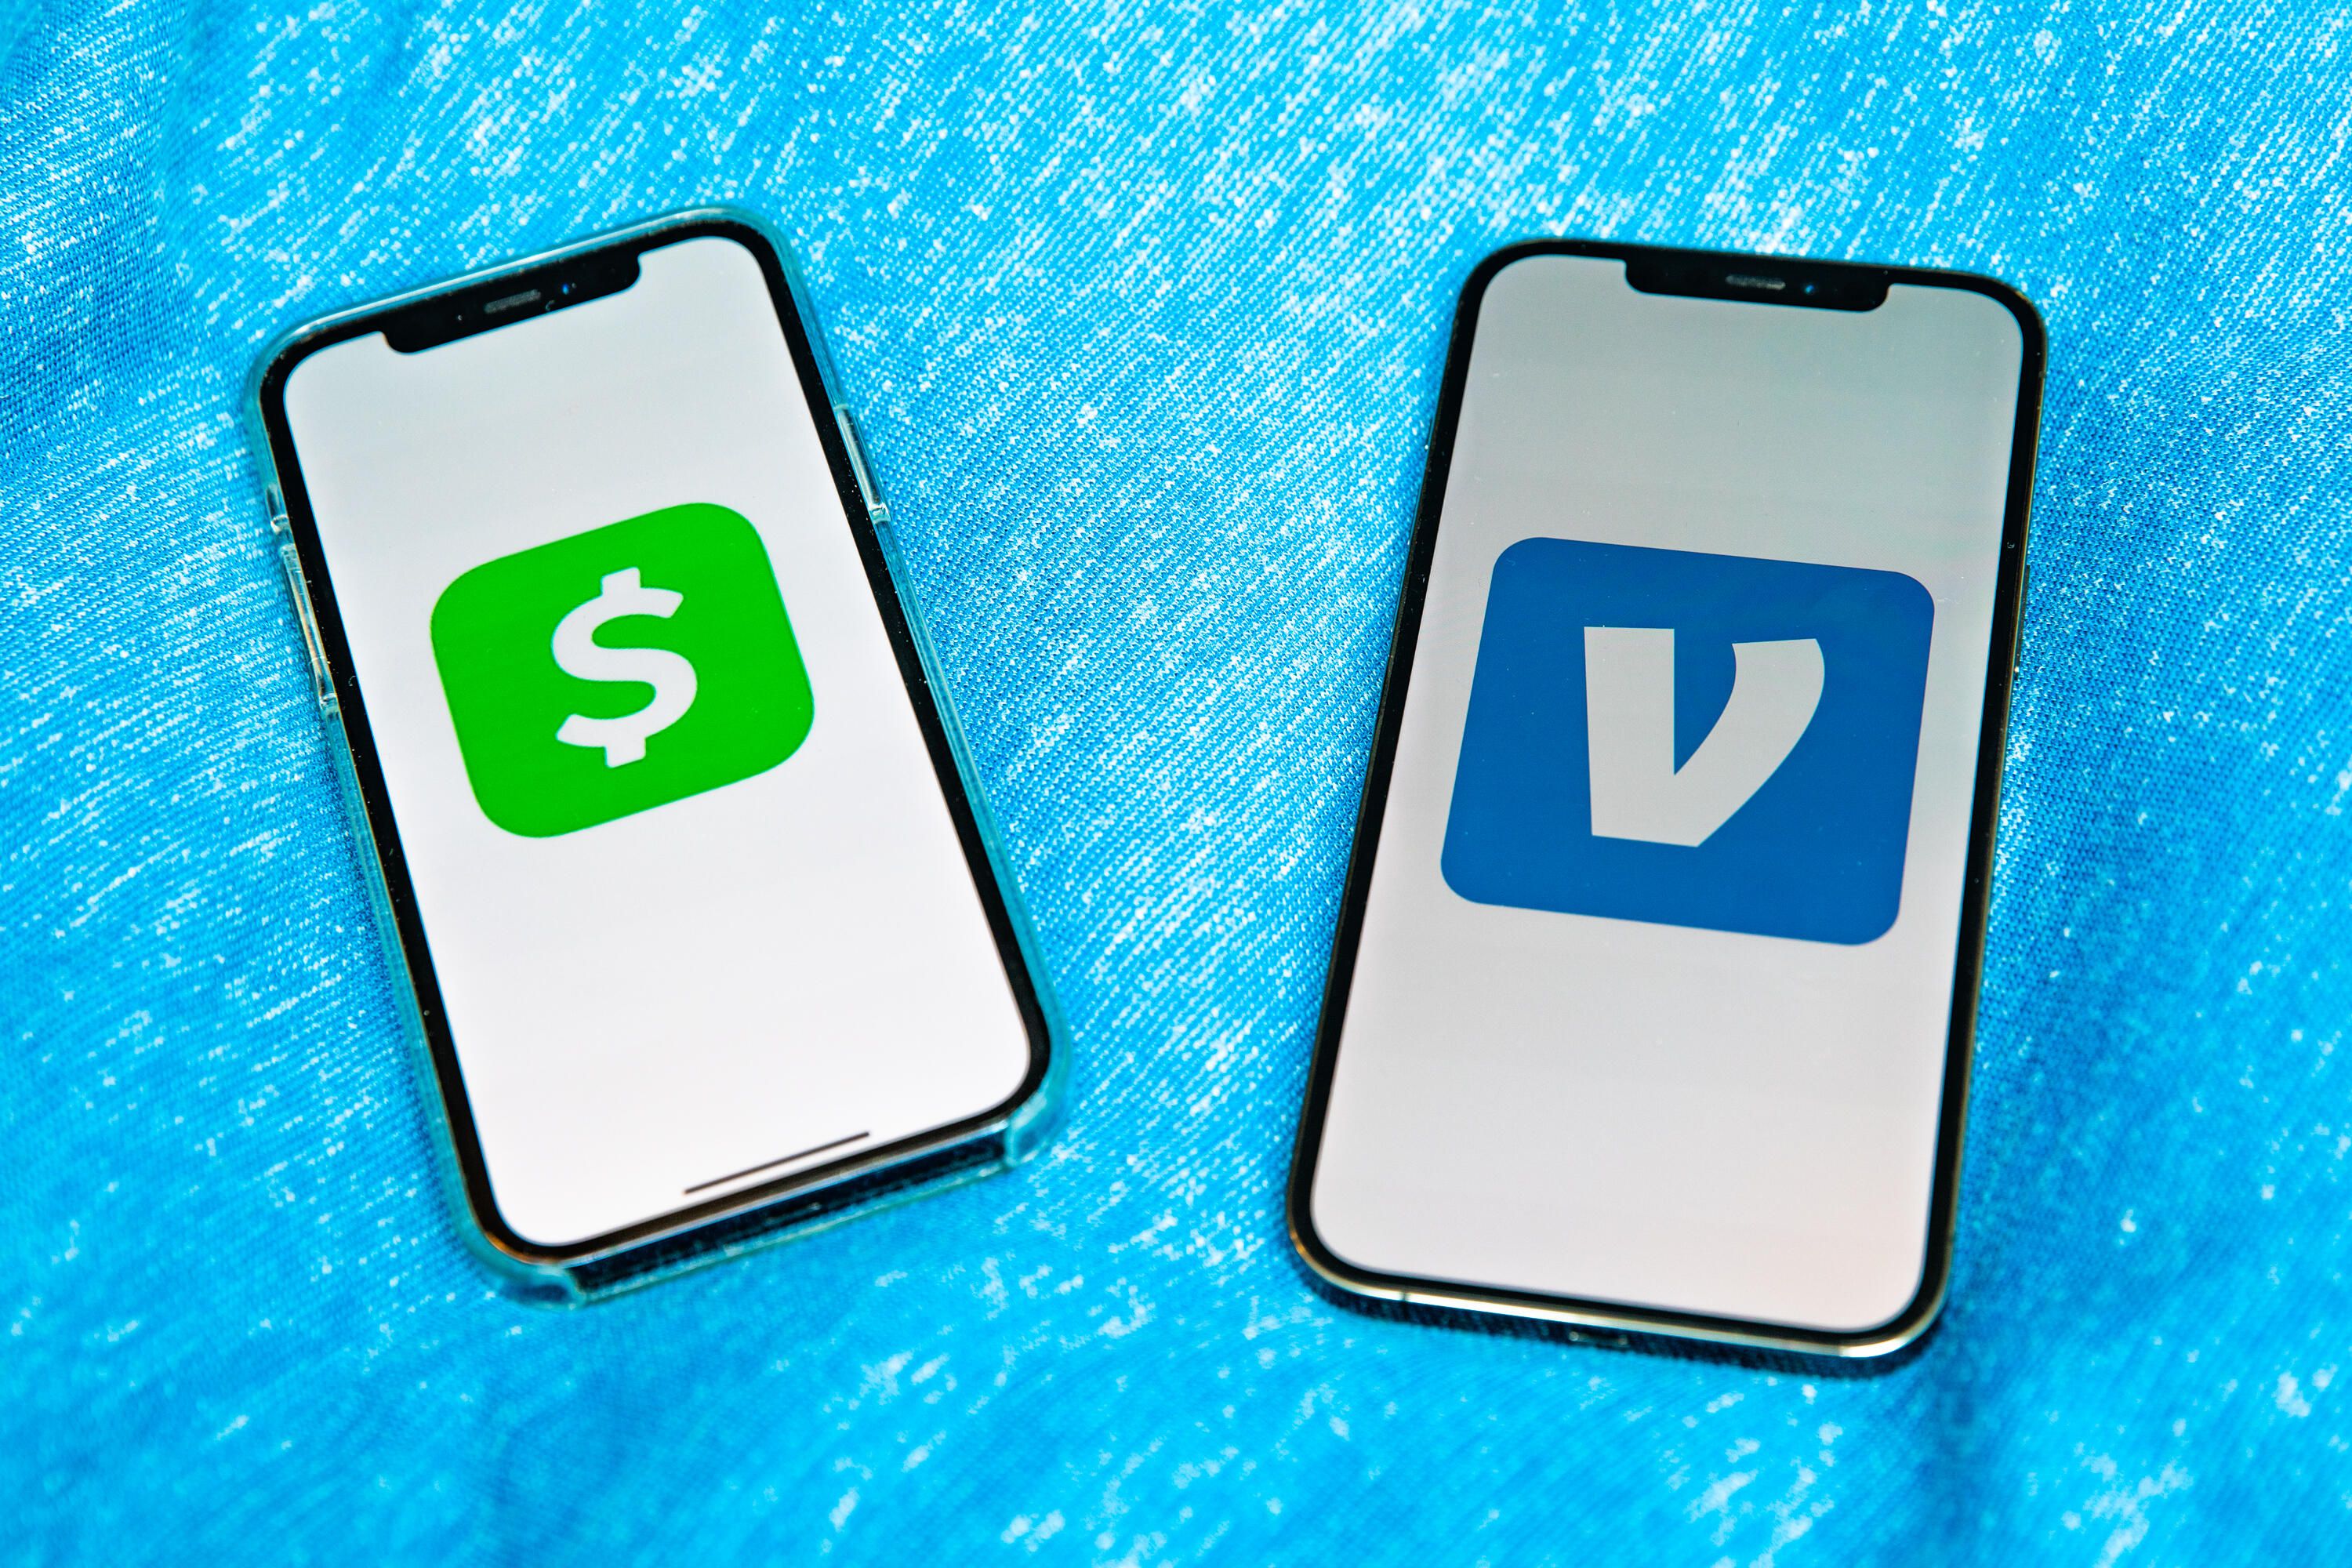 Mobile payment app like Venmo and Cash App